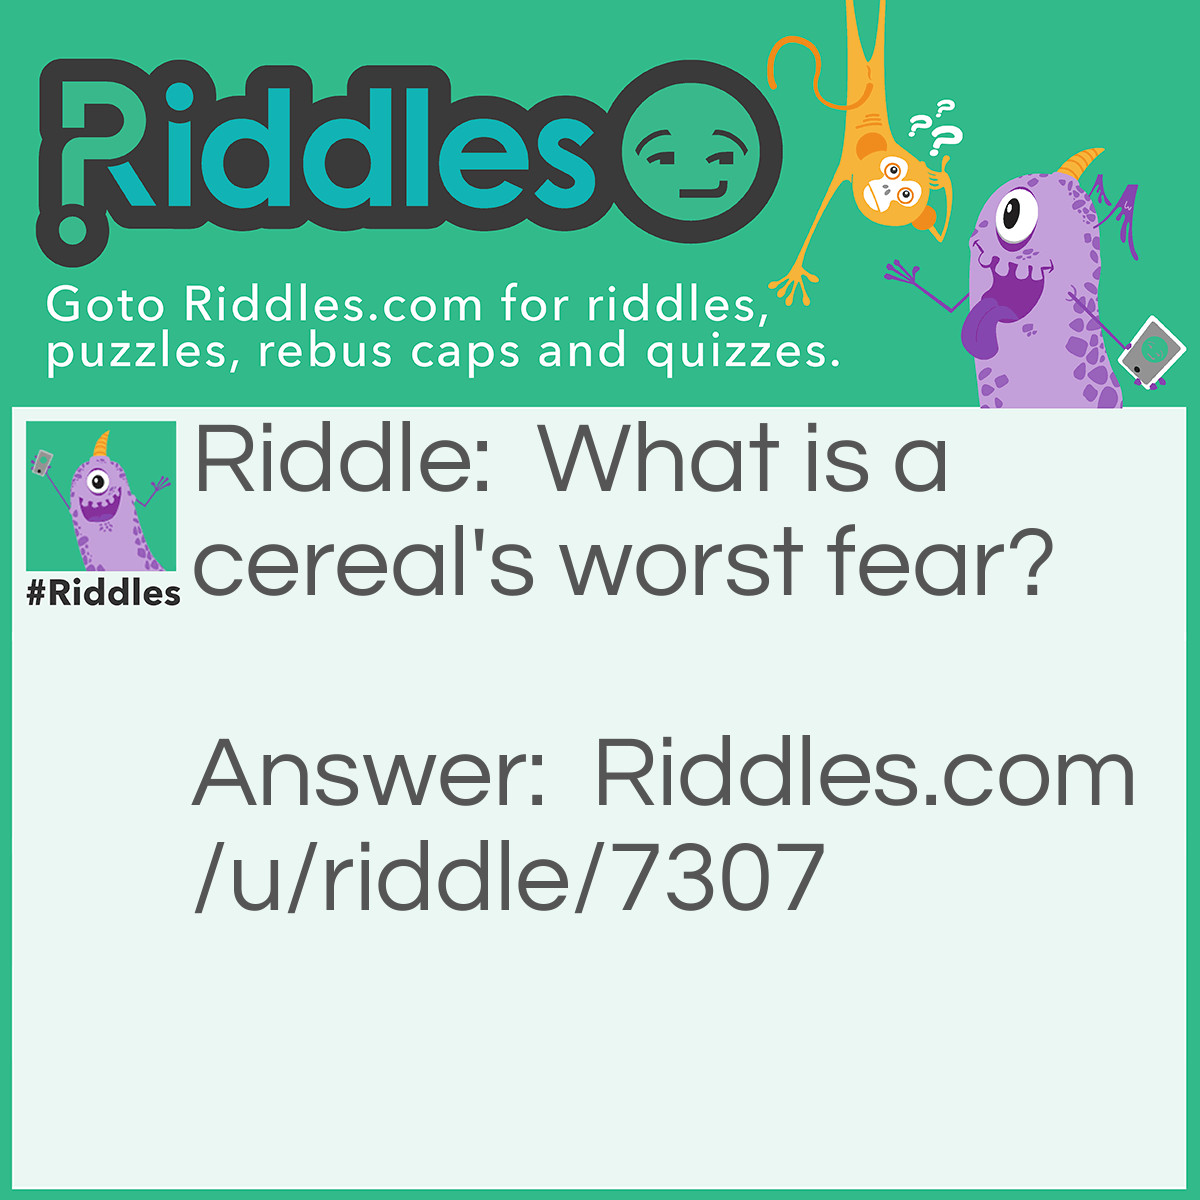 Riddle: What is a cereal's worst fear? Answer: A cereal killer.